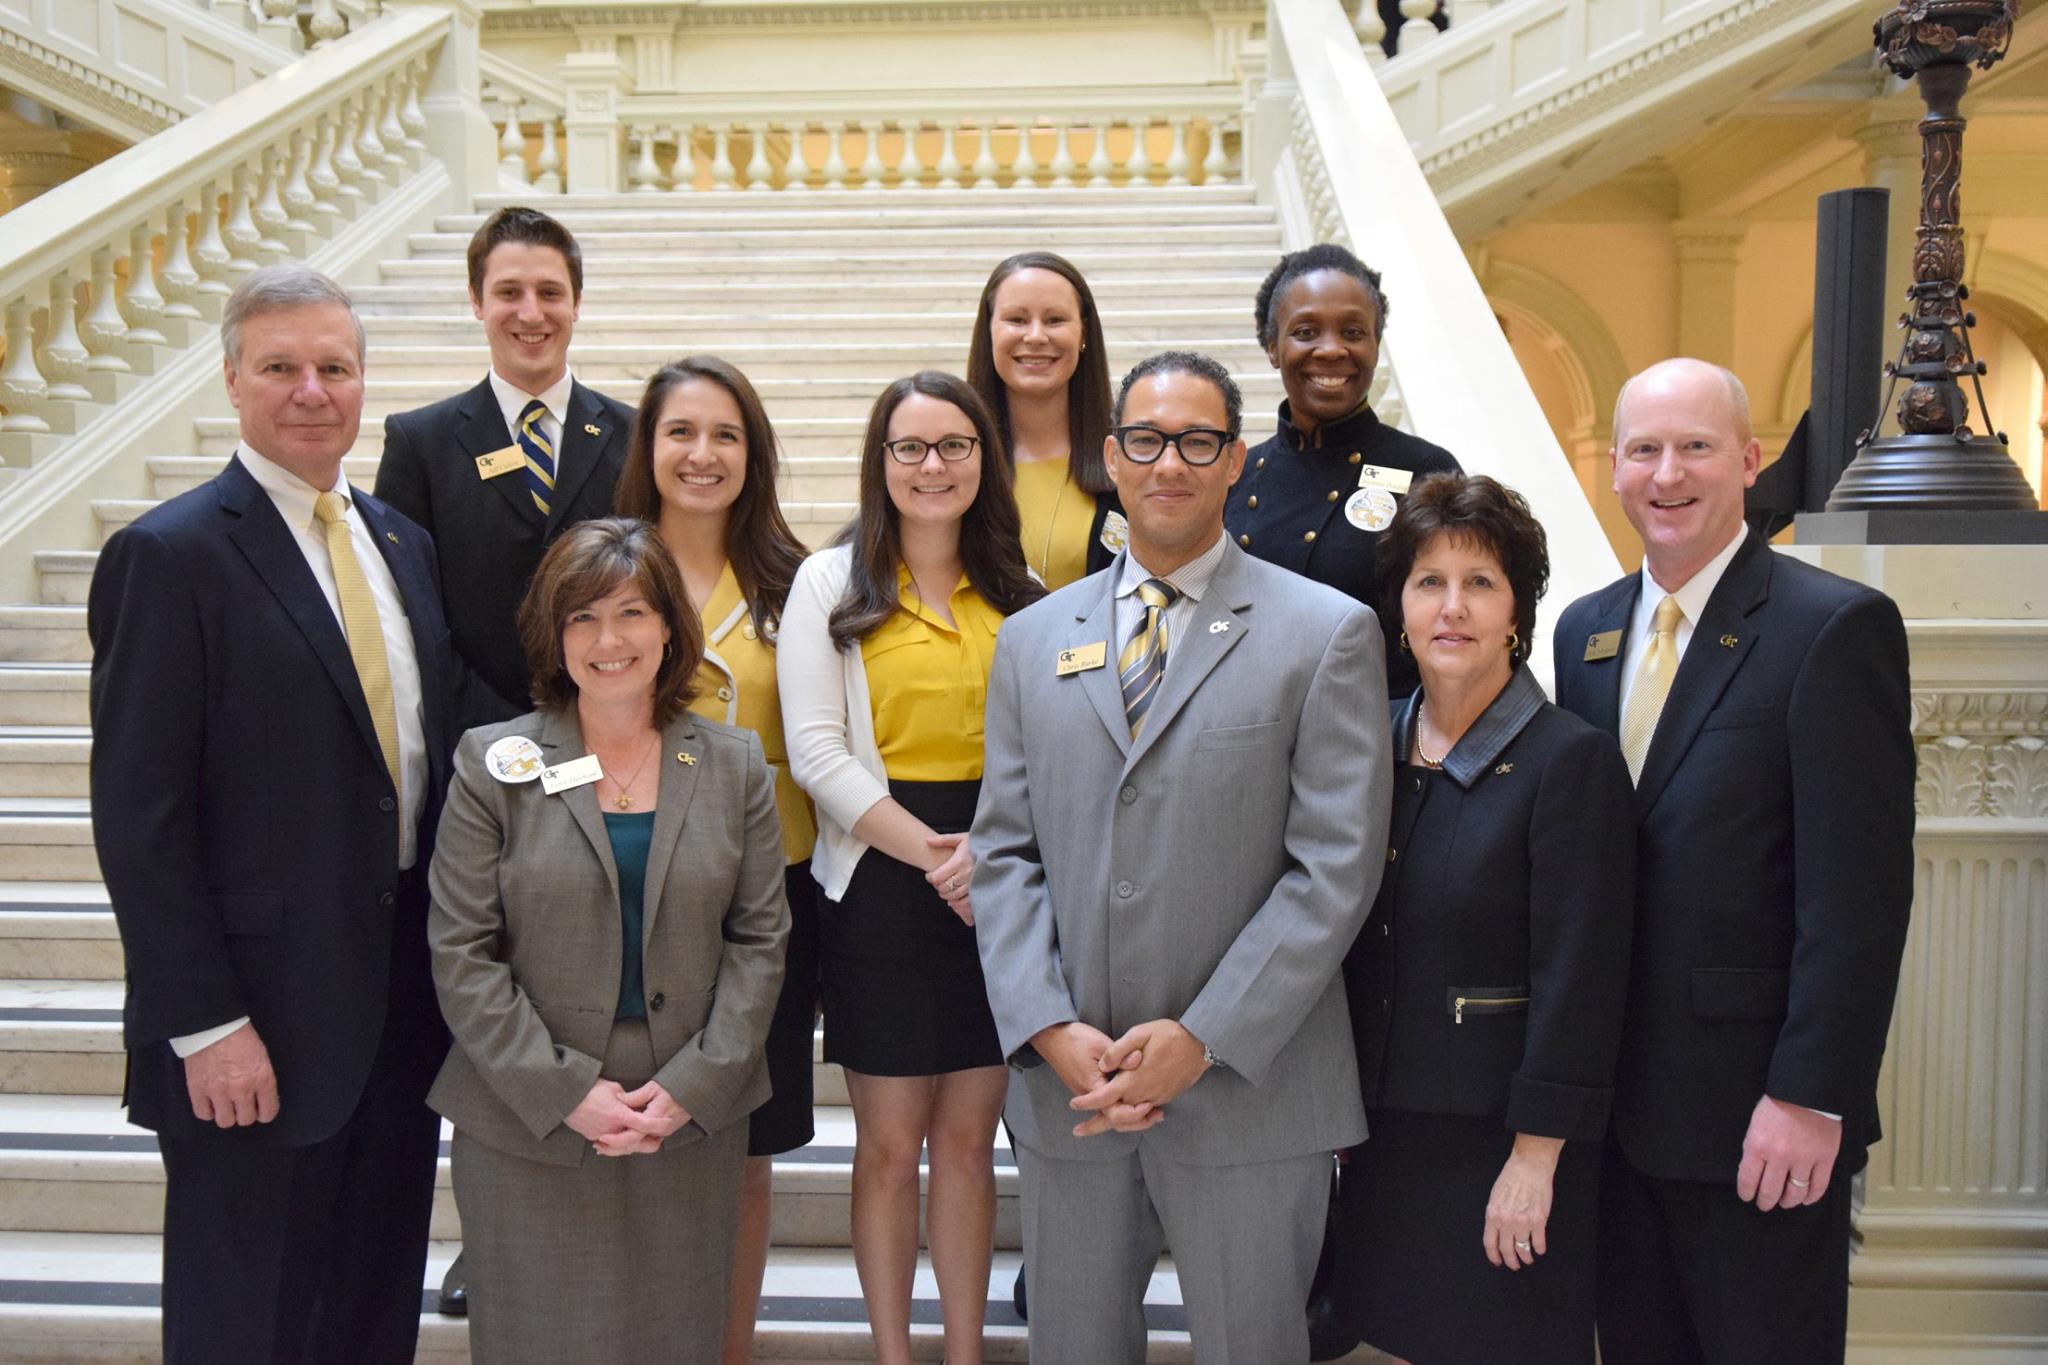 The Government and Community Relations team attends Student Day at the Capitol in February 2016, along with President G.P. "Bud" Peterson and Assistant Vice President Lynn Durham.